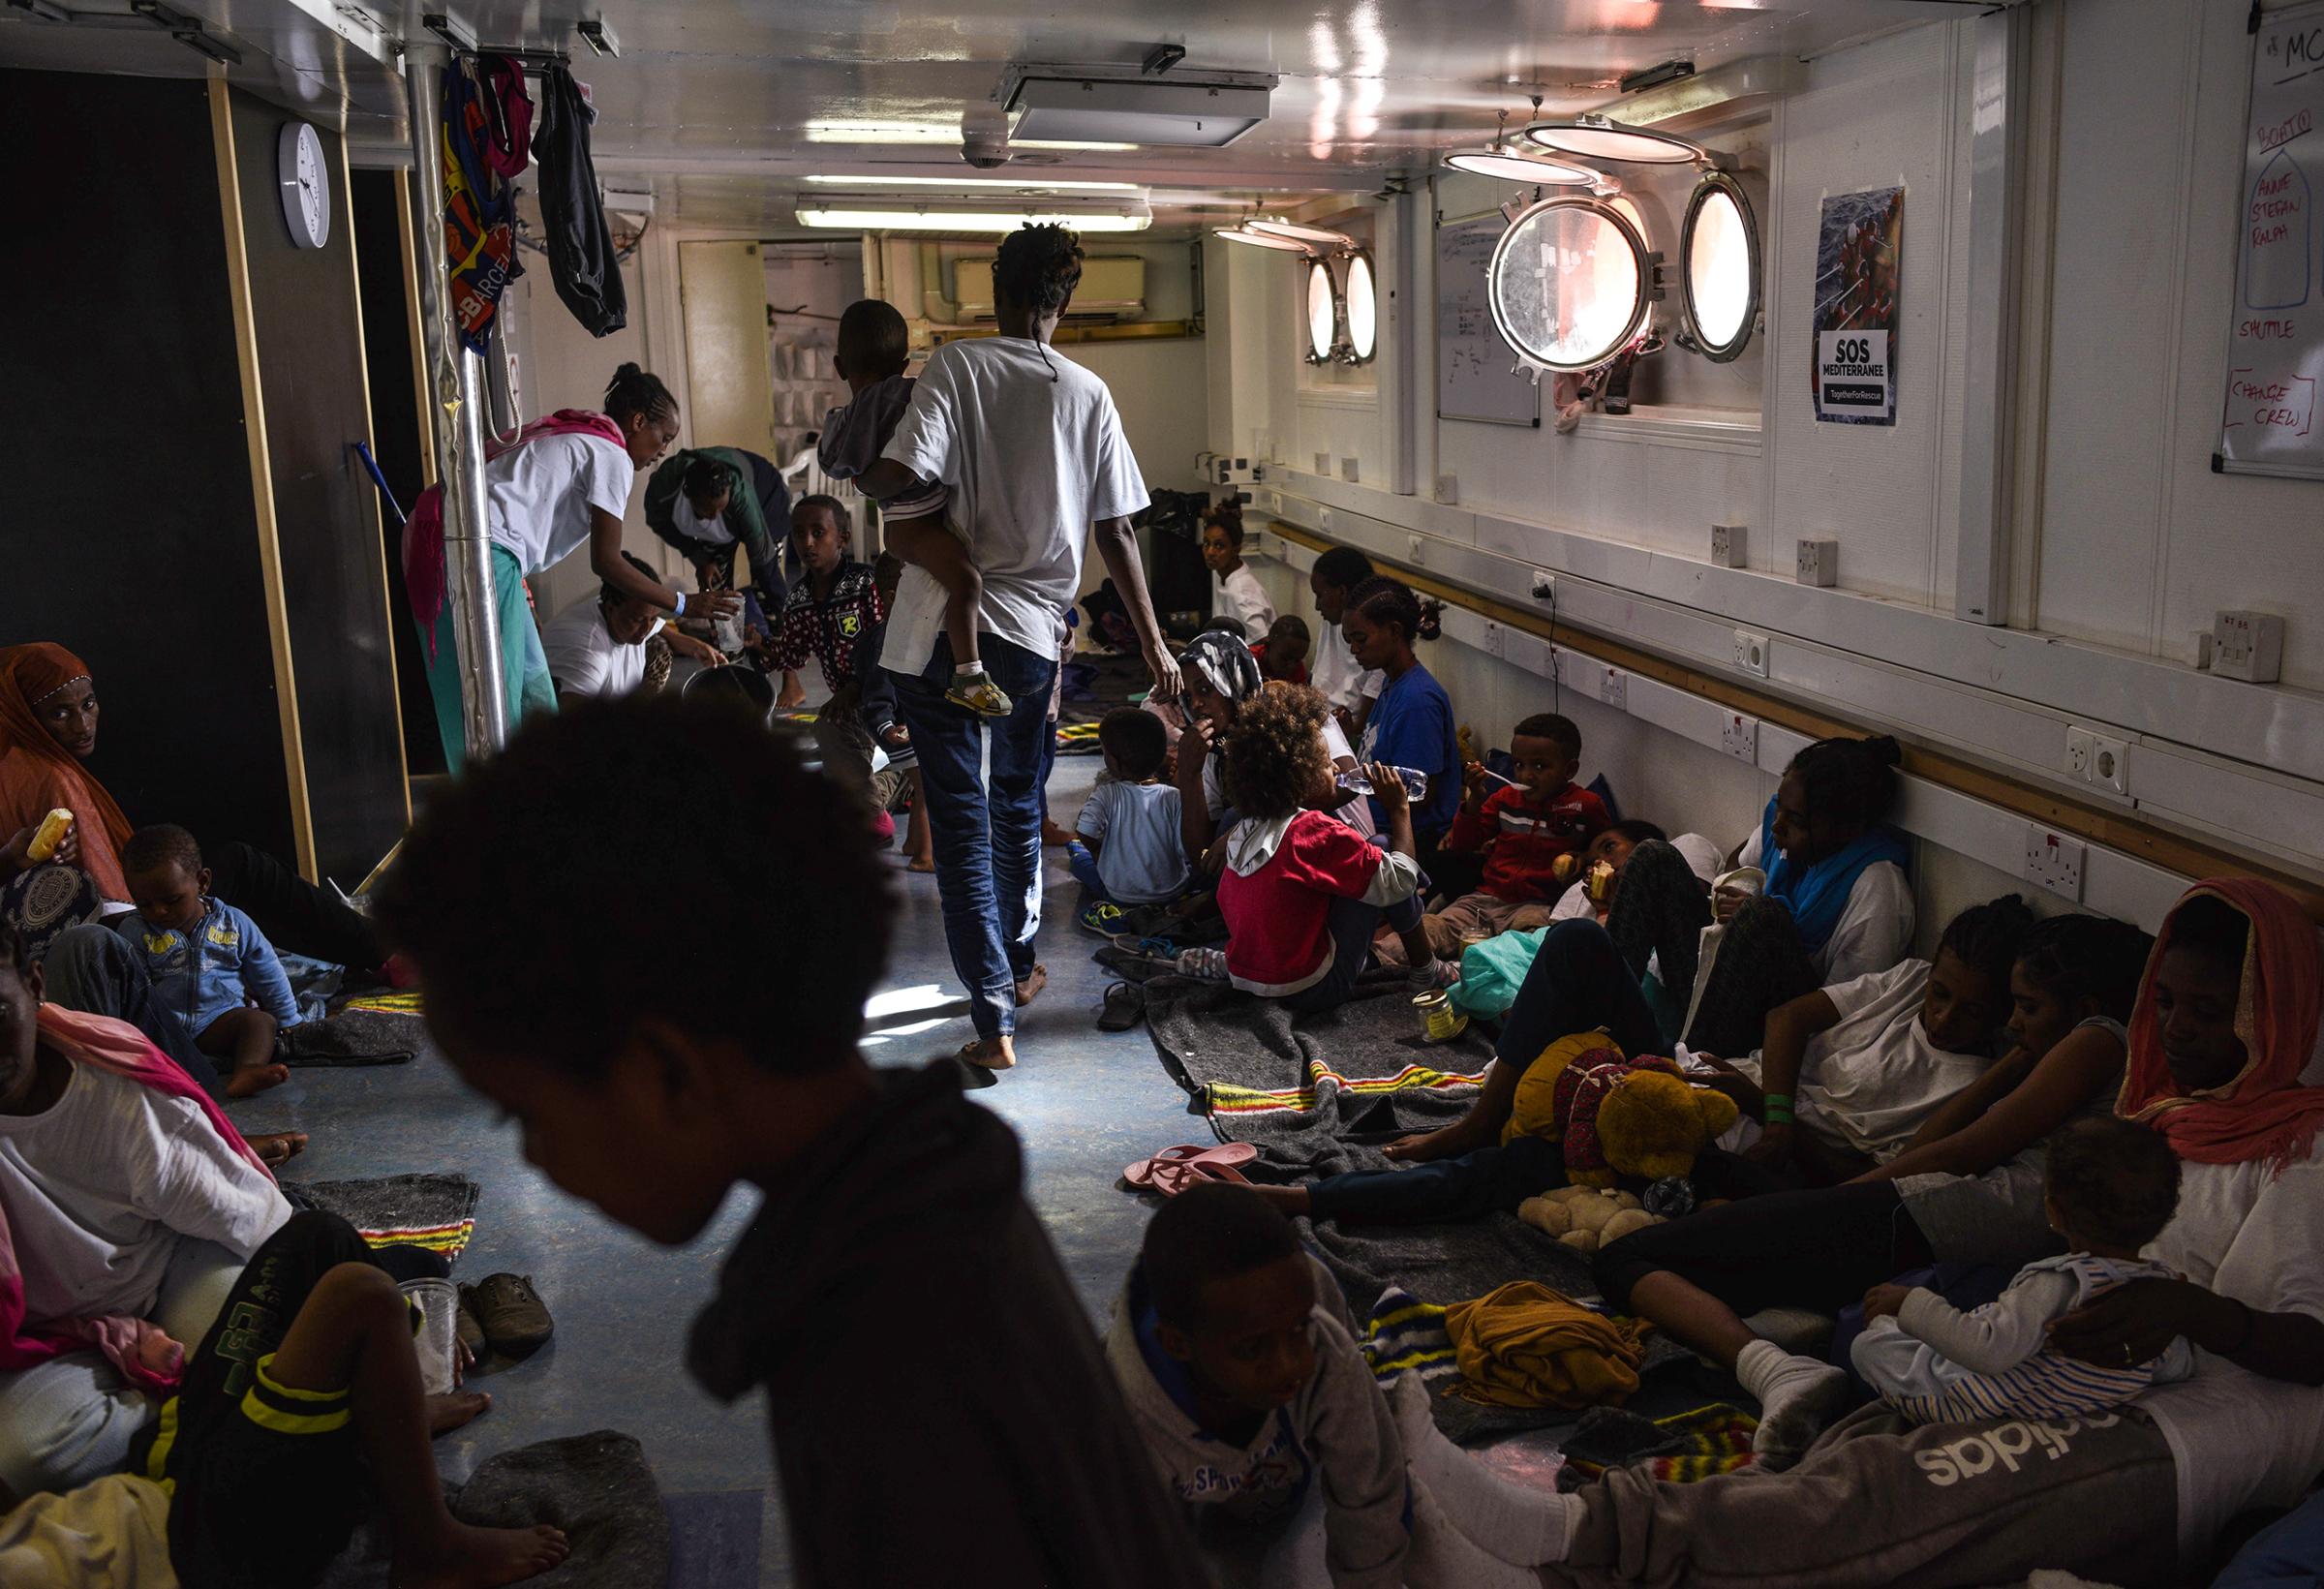 Women and children eat and rest below the deck of the rescue ship. Aug. 22, 2016.